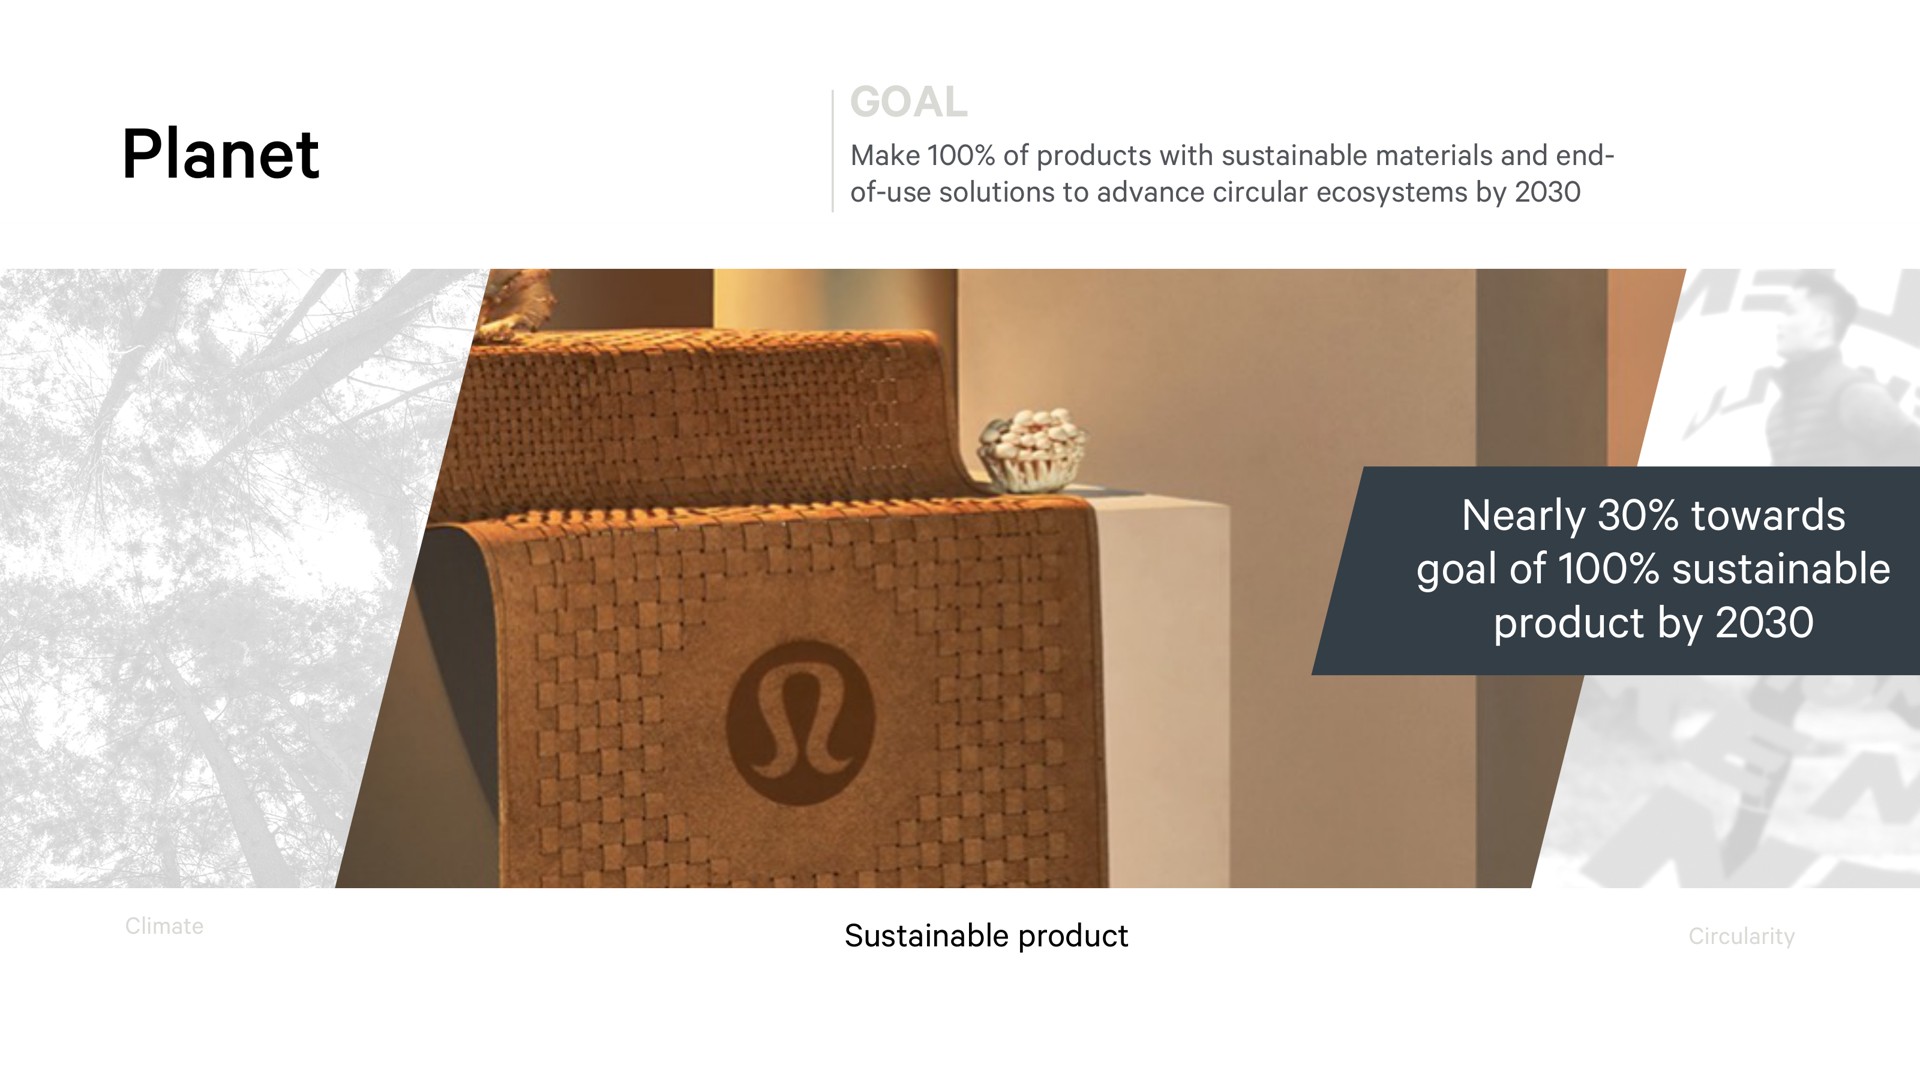 planet goal nearly towards goal of sustainable product by | Lululemon